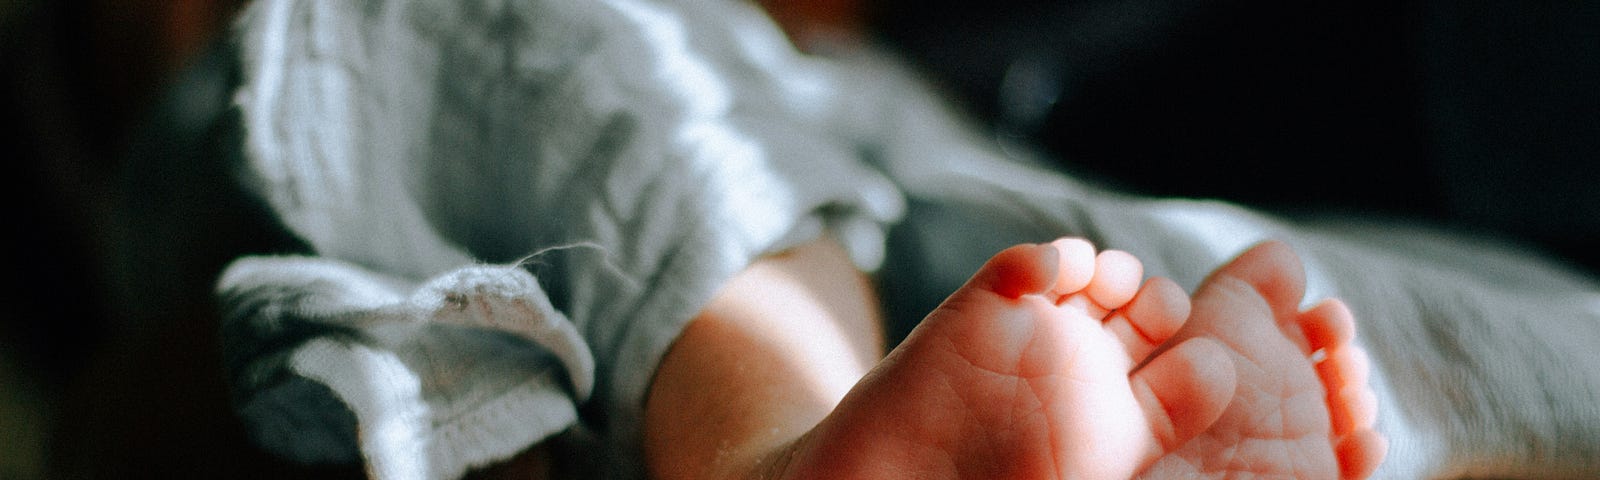 A newborn baby’s feet cradled in a mother’s hand.